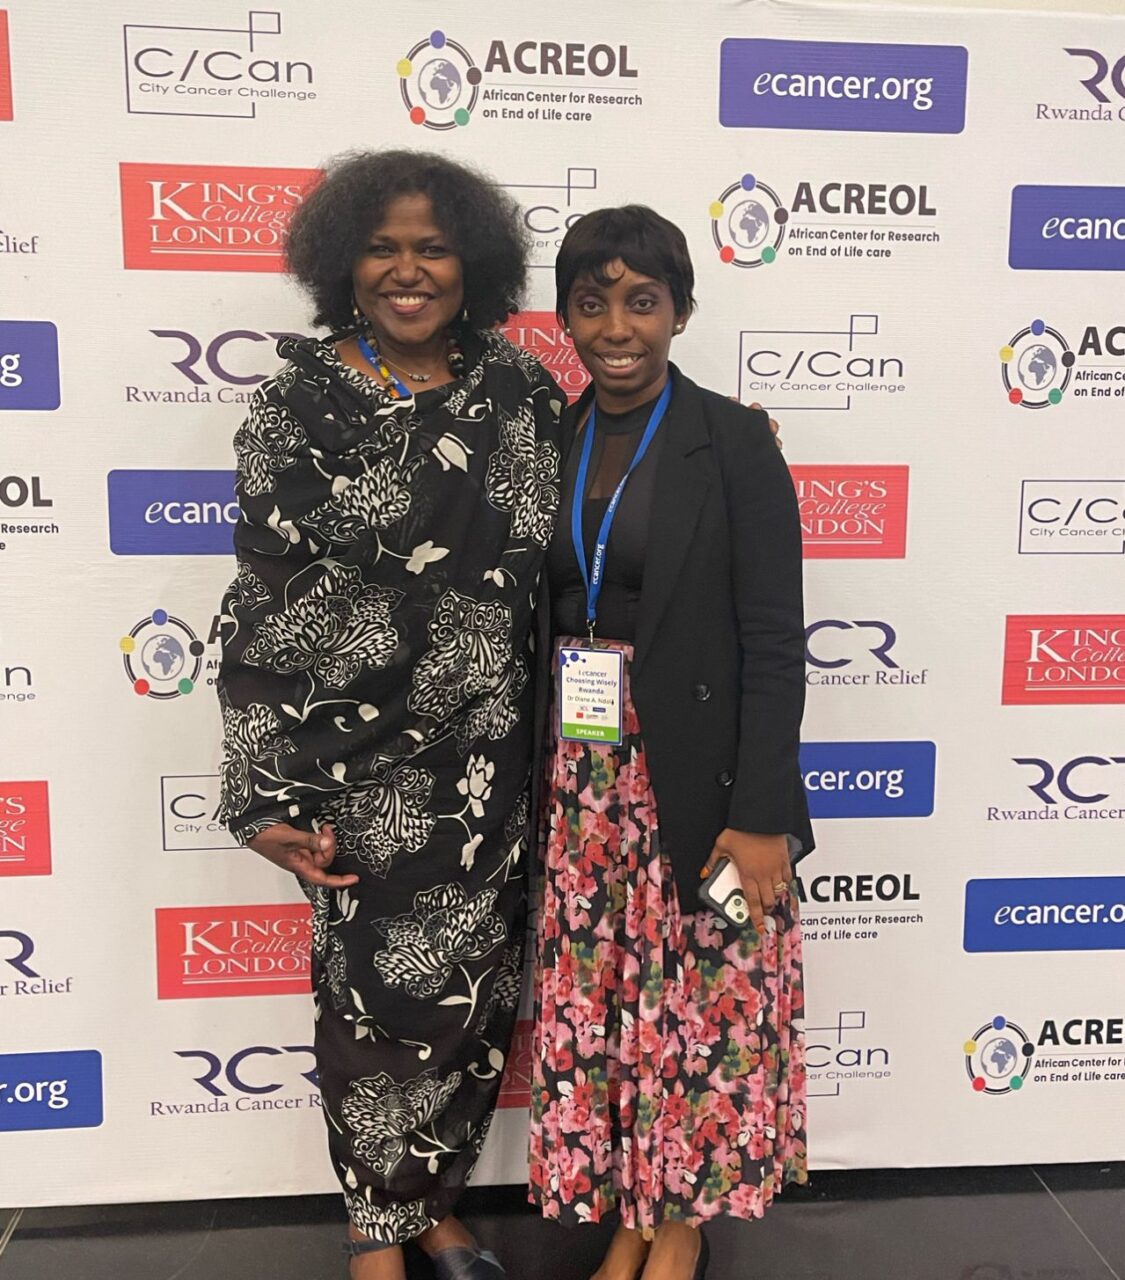 Nazik Hammad: Great privilege to connect again with Dr. Diane Ndoli, one of the two women oncologists in Rwanda